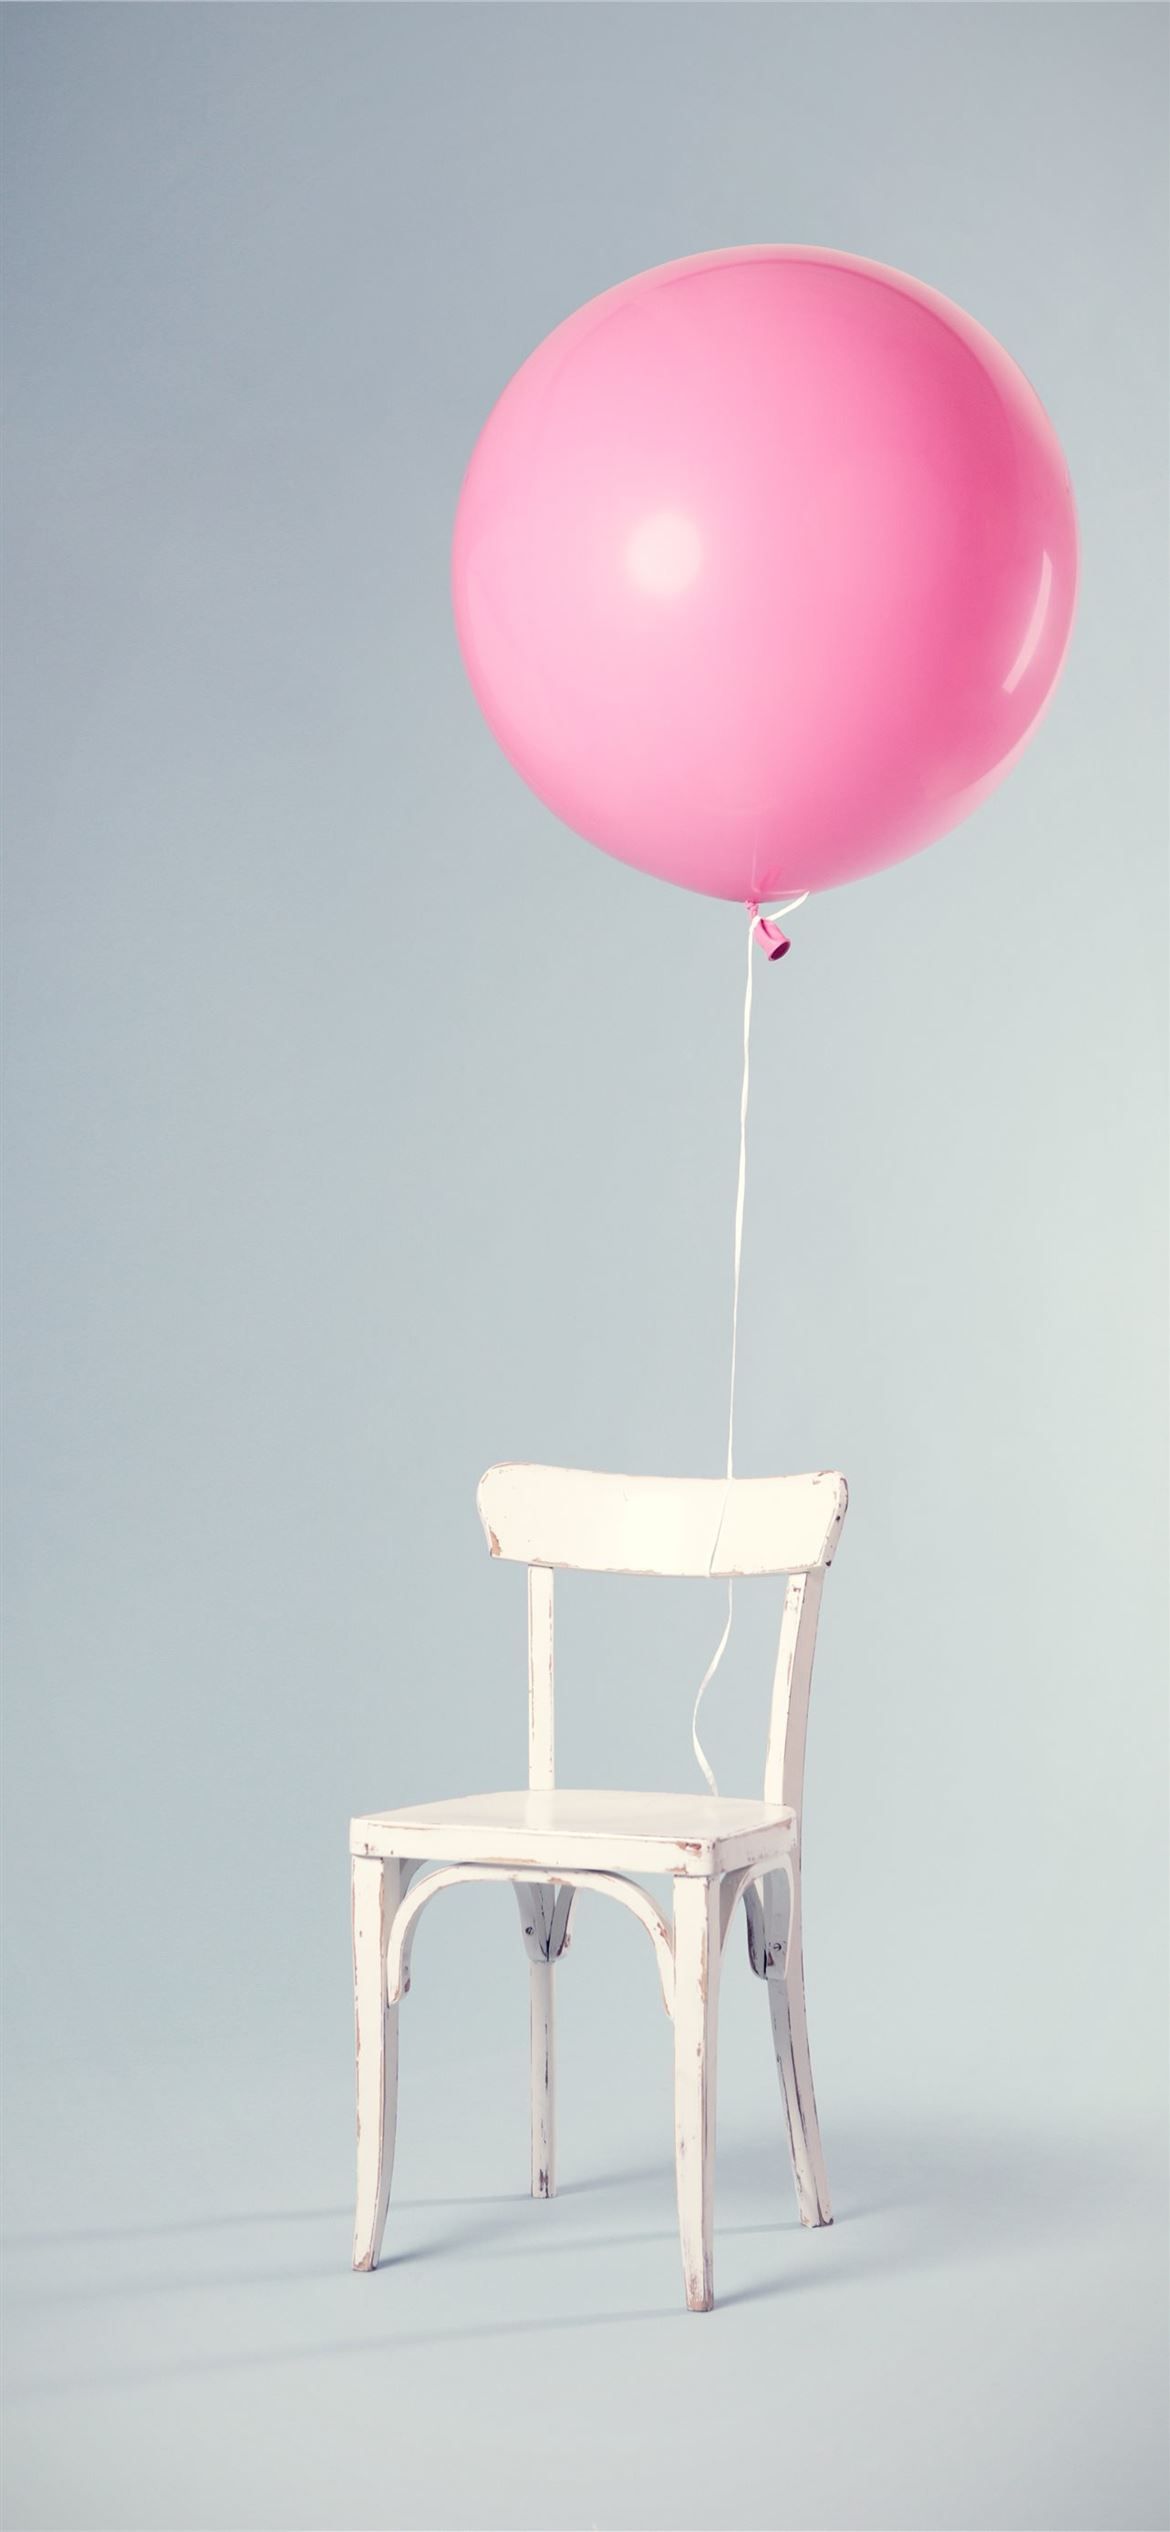 A chair with an inflated balloon tied to it - Birthday